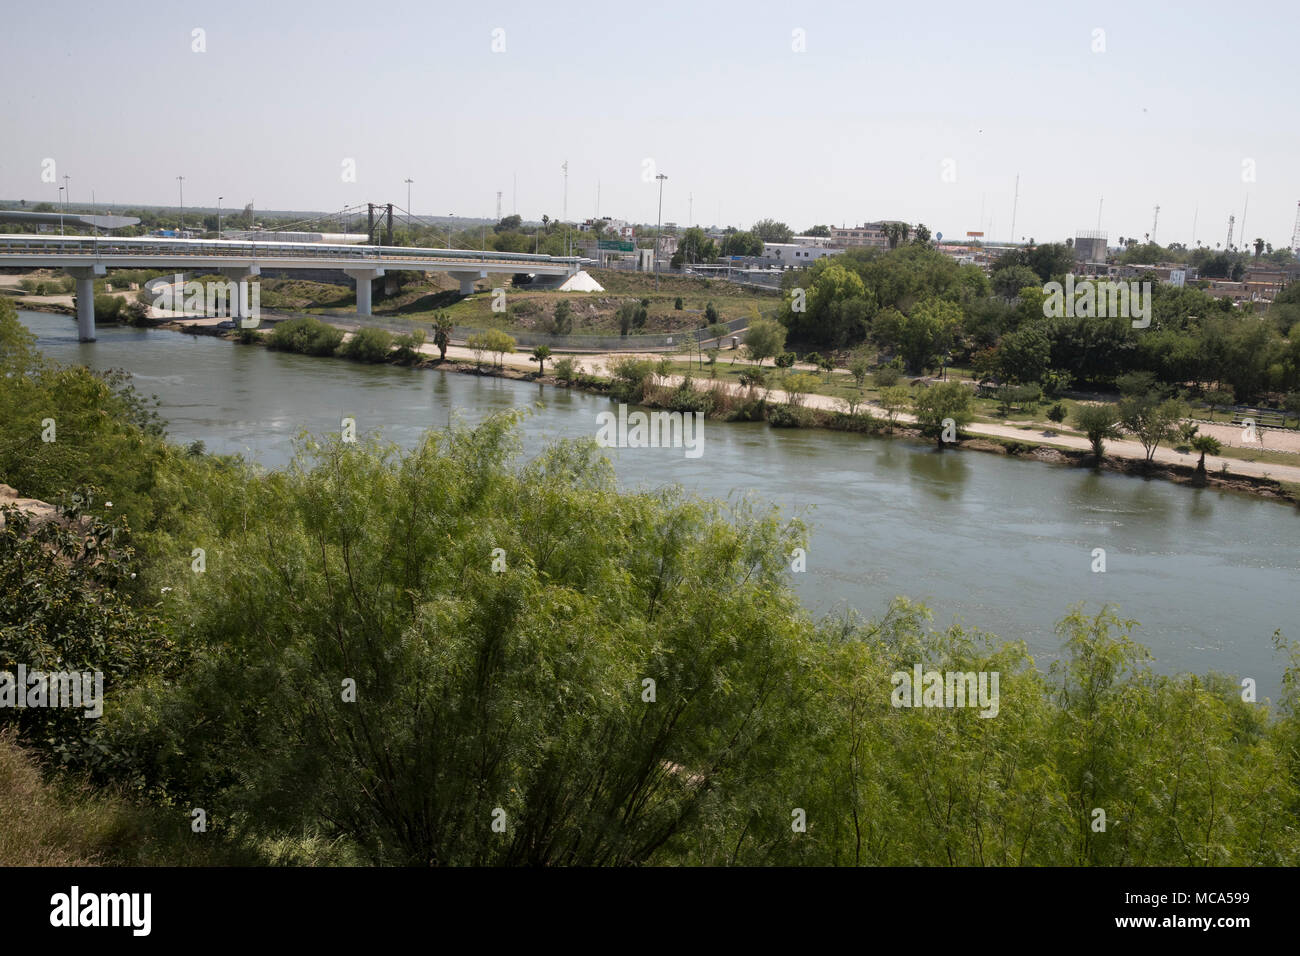 The Rio Grande River flows southward between the bluffs of Roma, TX., and the Mexican city of Ciudad Miguel Aleman to the right. Stock Photo